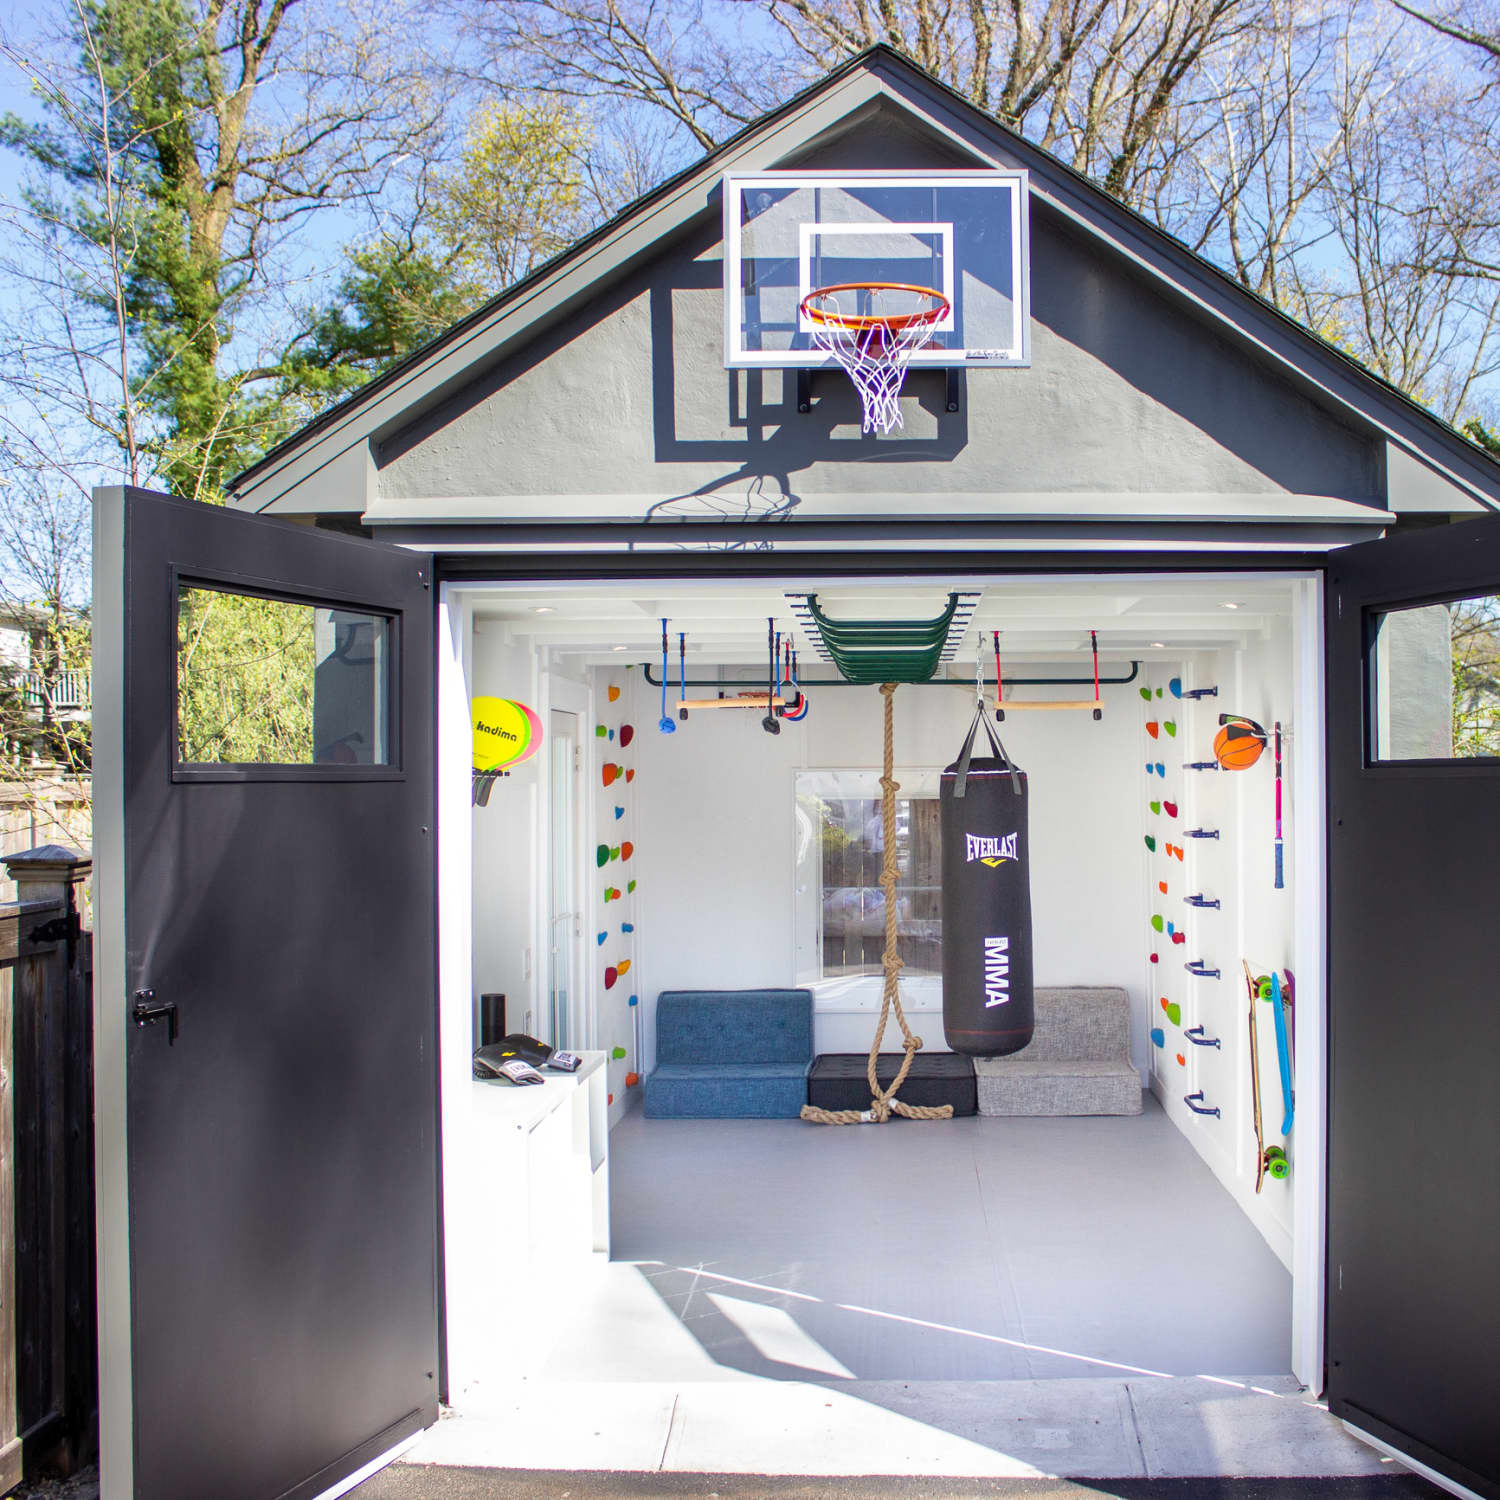 Home garage converted into a gym with basketball hoop.